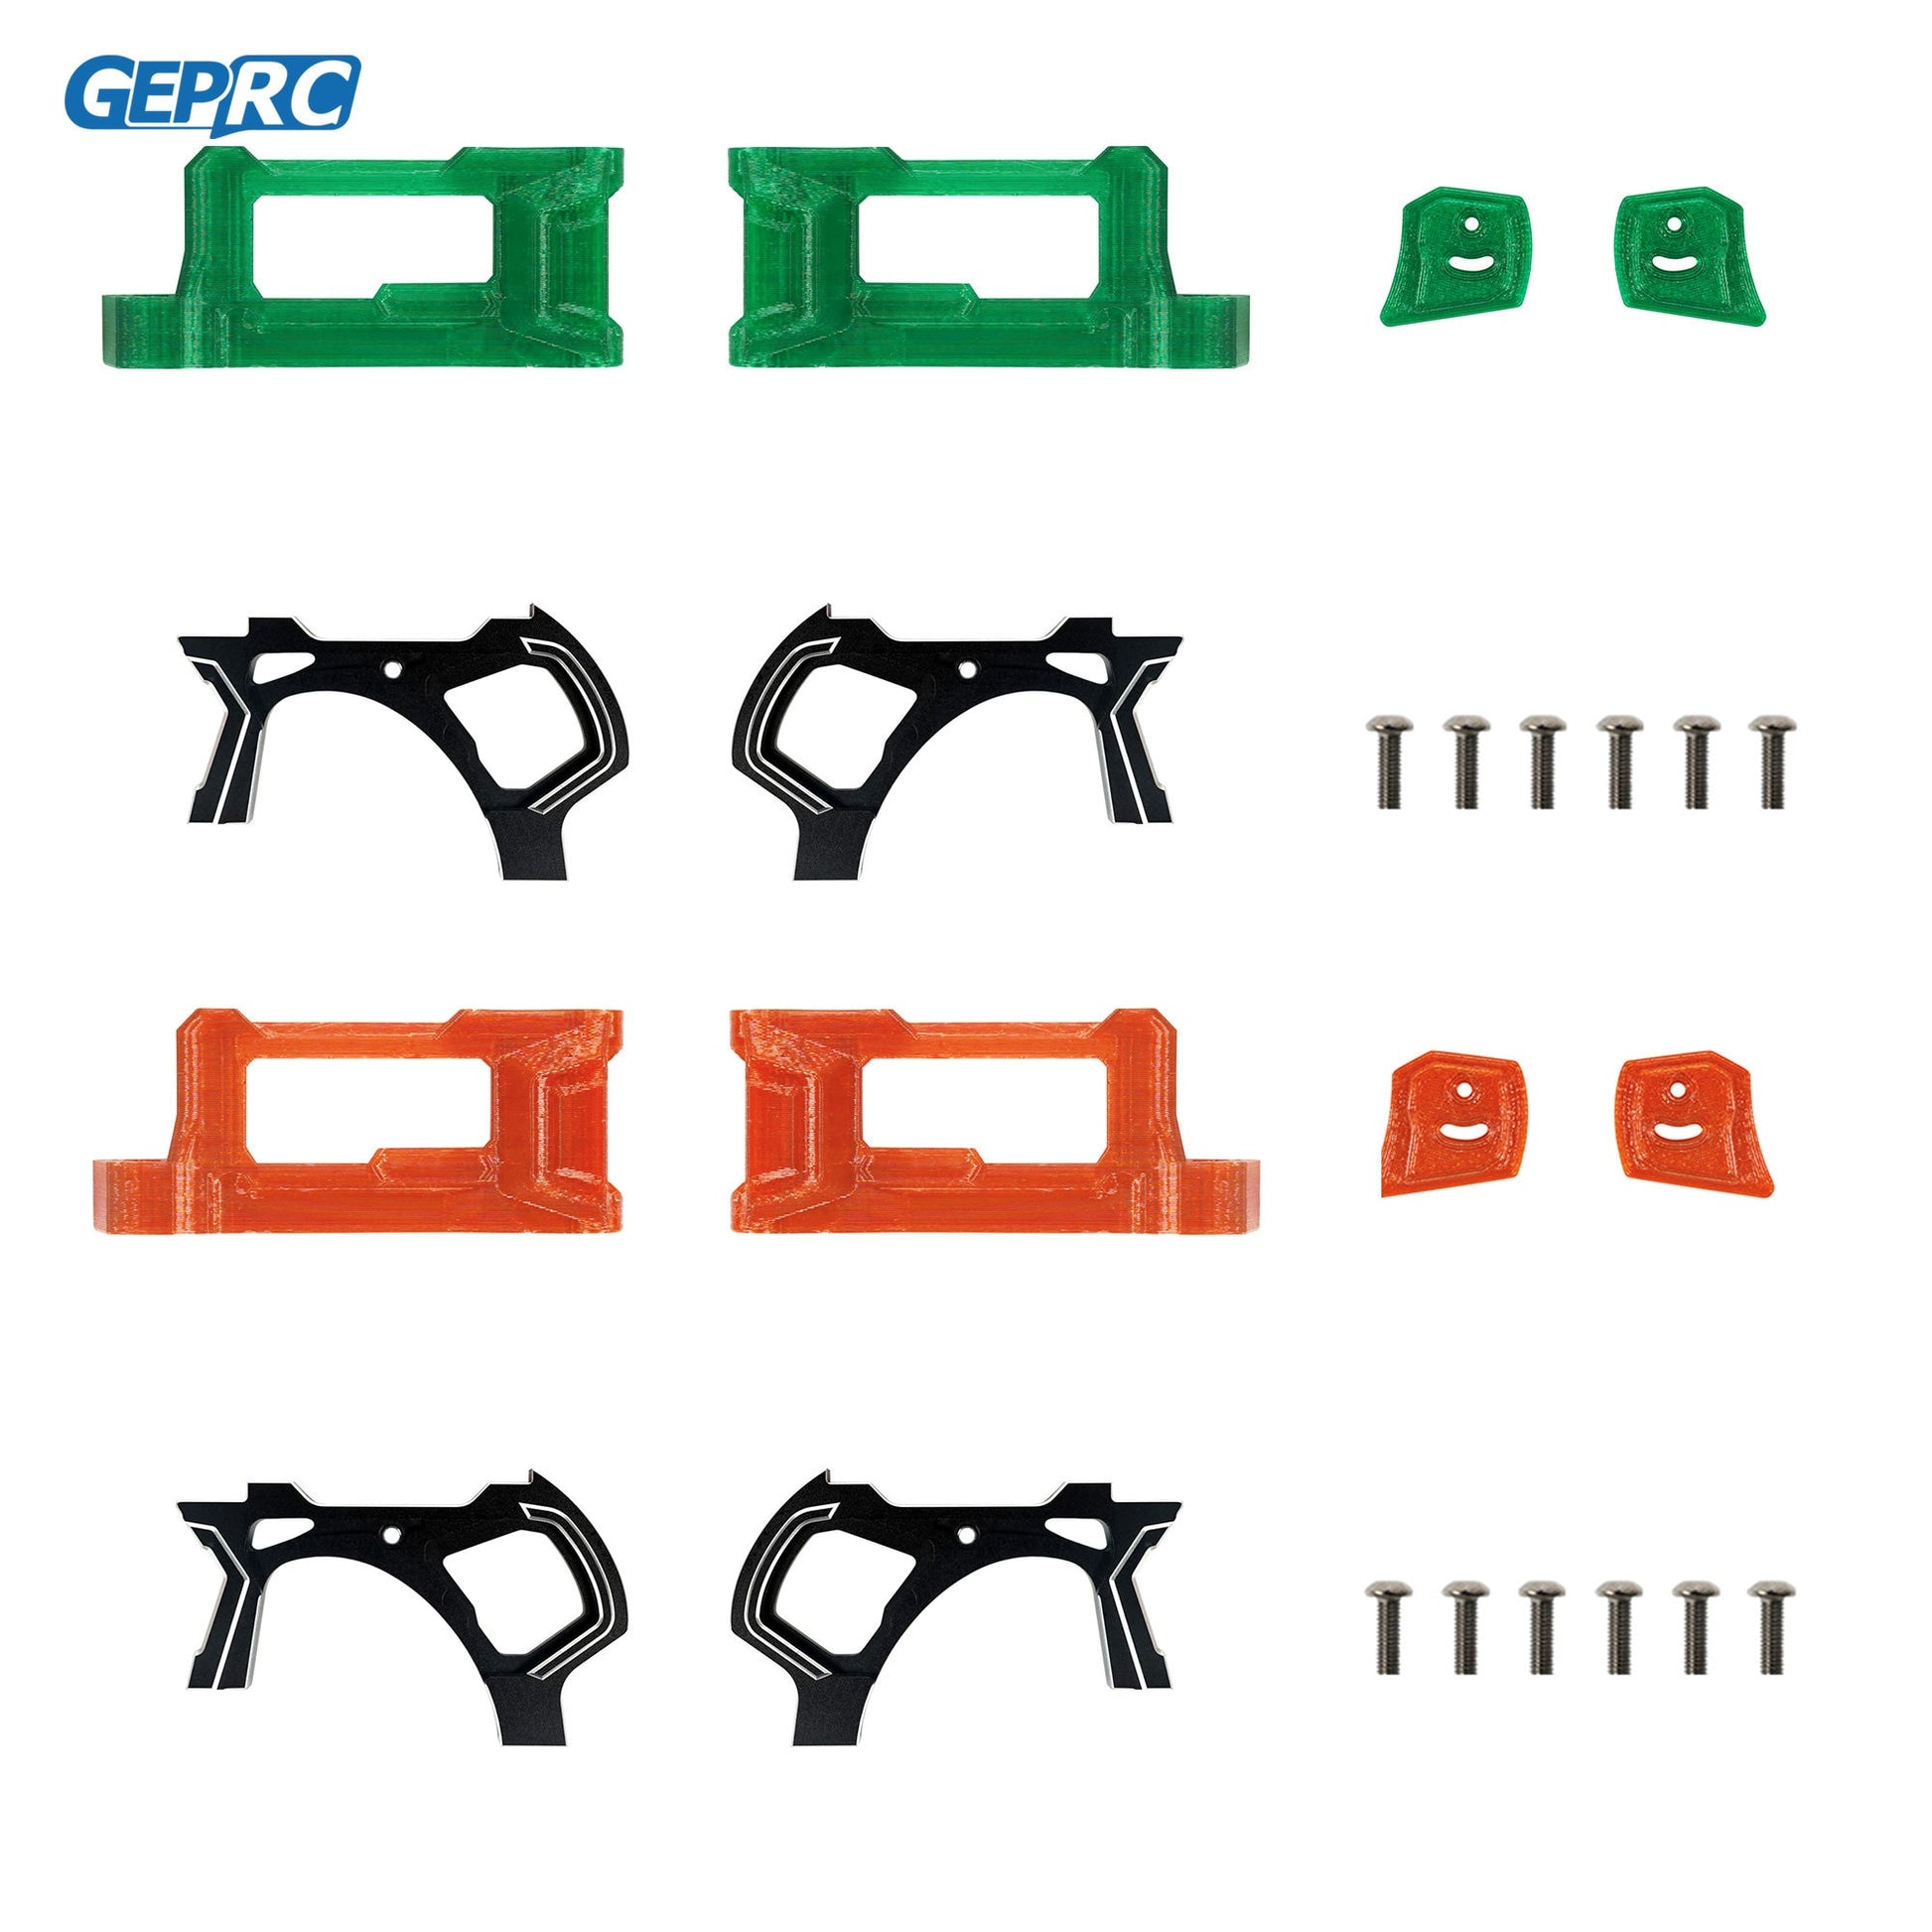 GEPRC GEP-MK5 O3 Frame Parts - Upgrade Package Base Quadcopter Frame FPV Freestyle RC Racing Drone Mark5